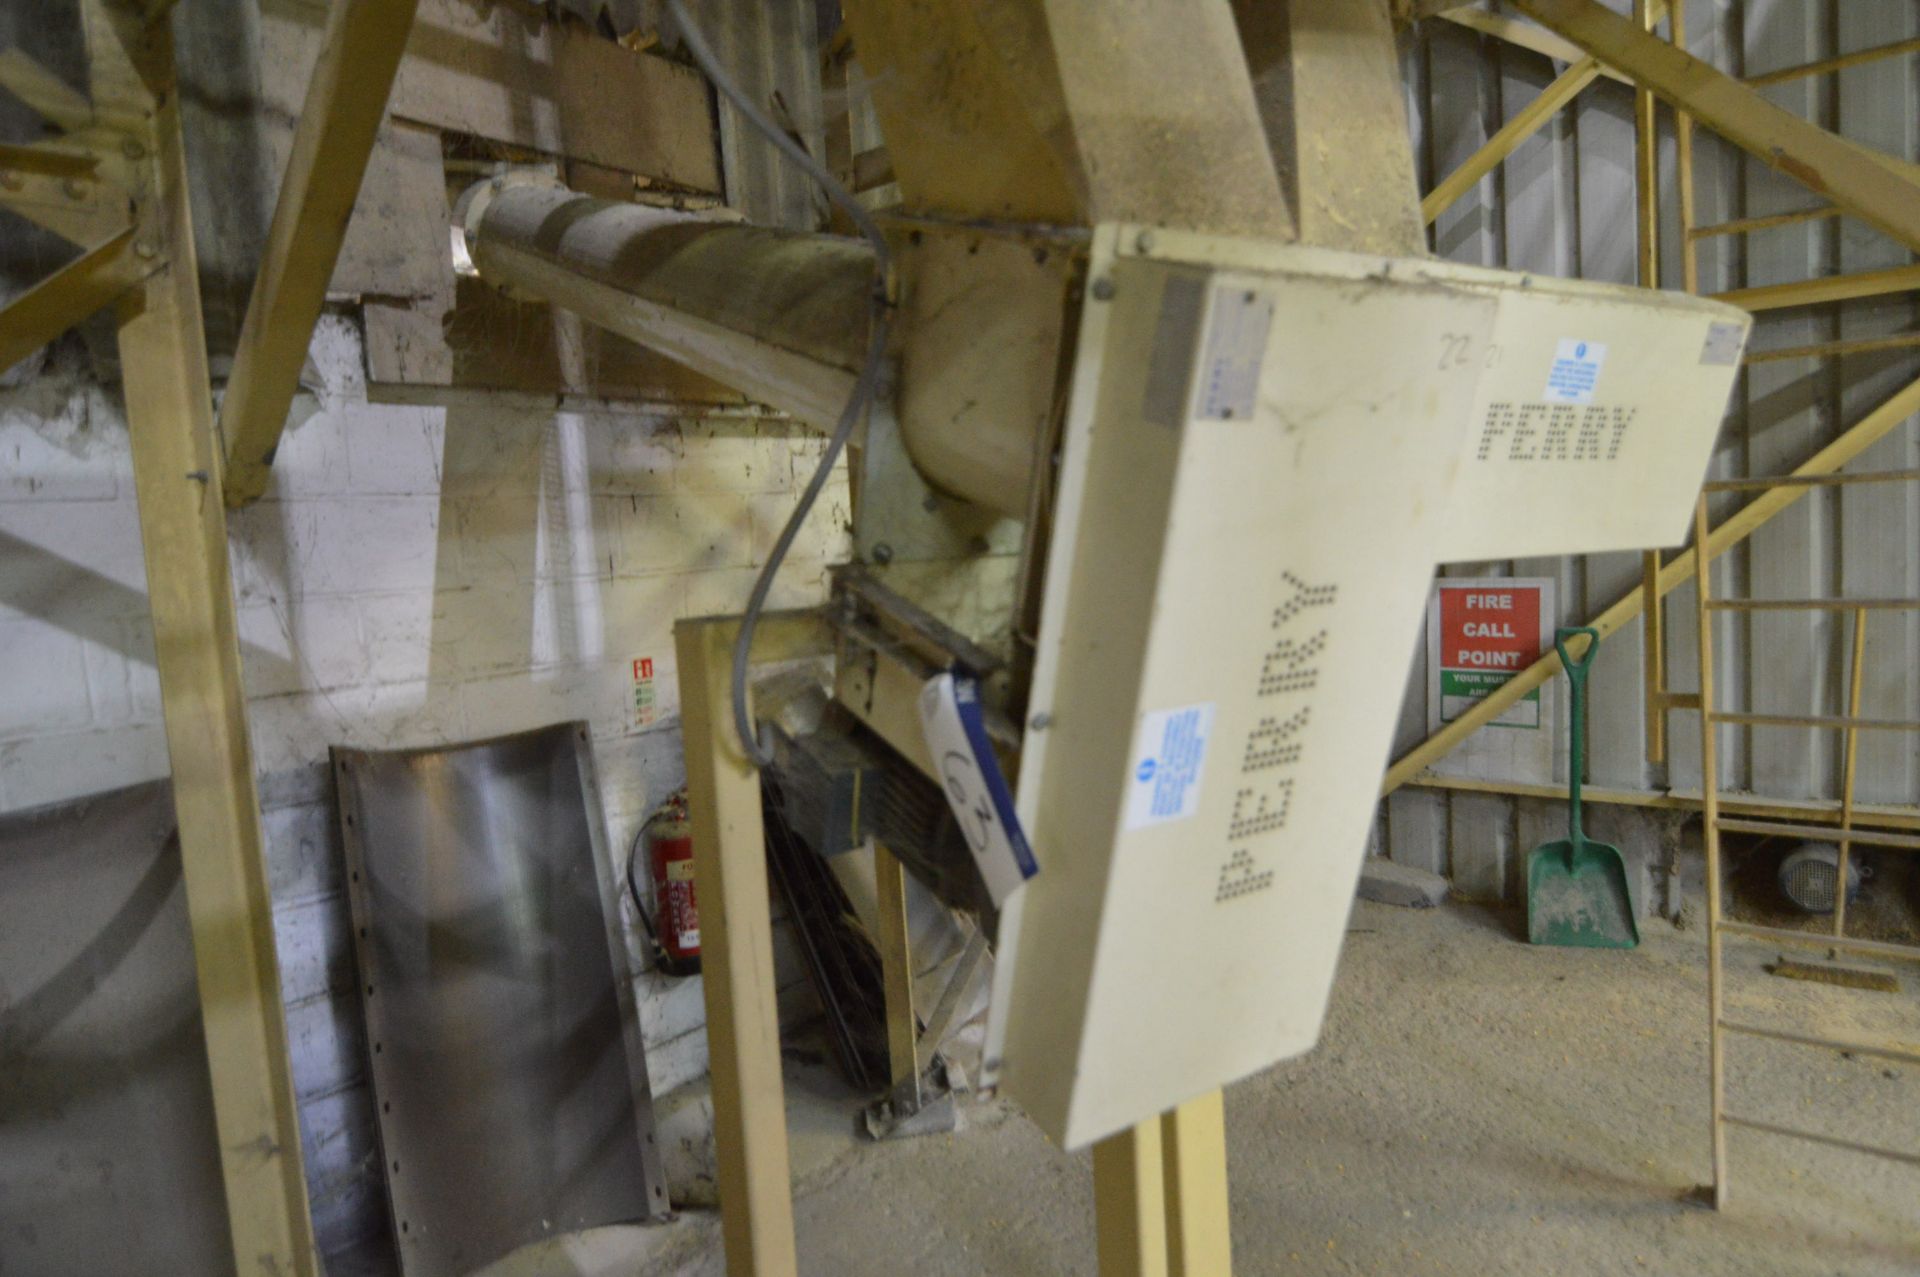 Perry 200mm dia. Inclined Auger Conveyor, serial no. AV609, year of manufacture 2007, approx. 5.5m